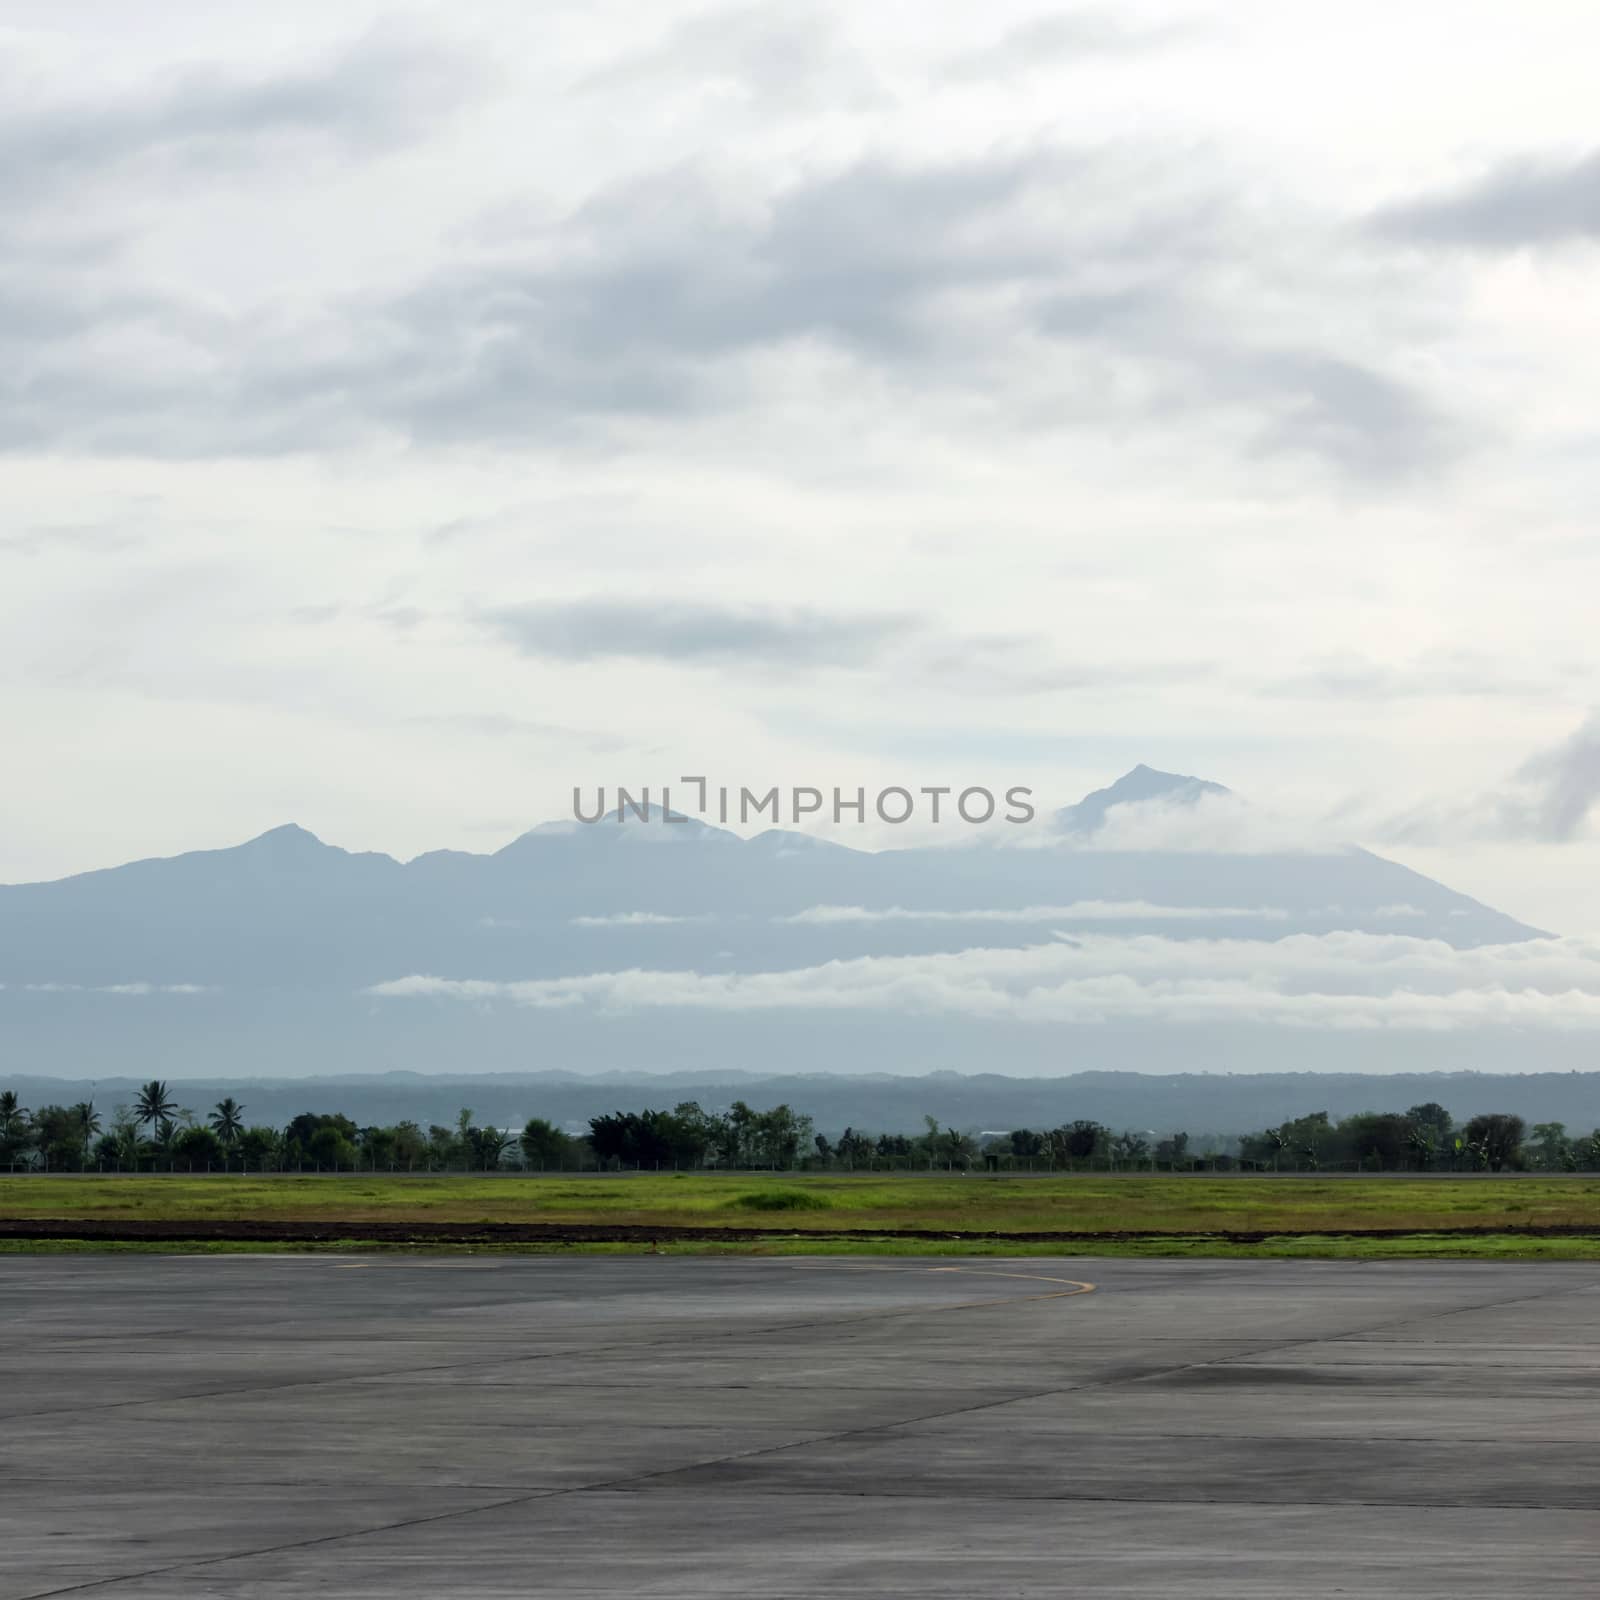 View runway with mountain and cloud background